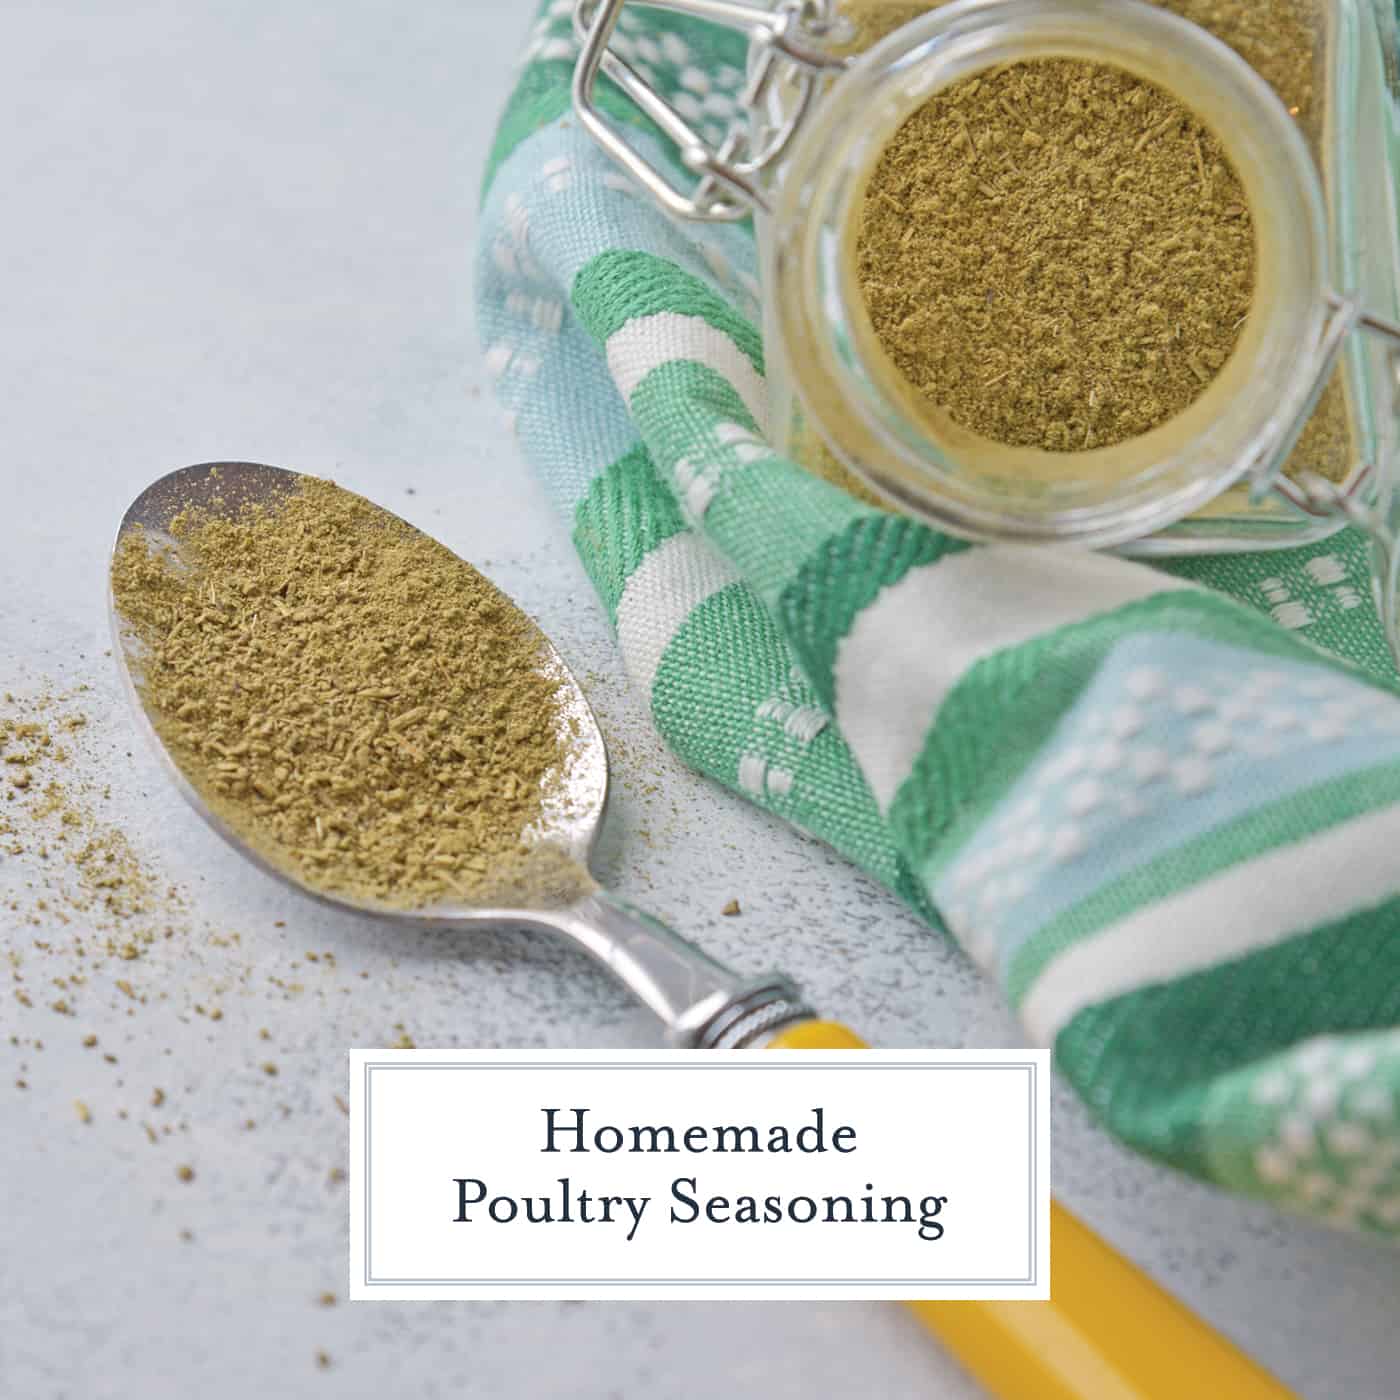 Homemade Poultry Seasoning is super easy to make, you probably already have all the ingredients in your pantry! Season chicken, beef, seafood and more! #poultryseasoning #homemadespices www.savoryexperiments.com